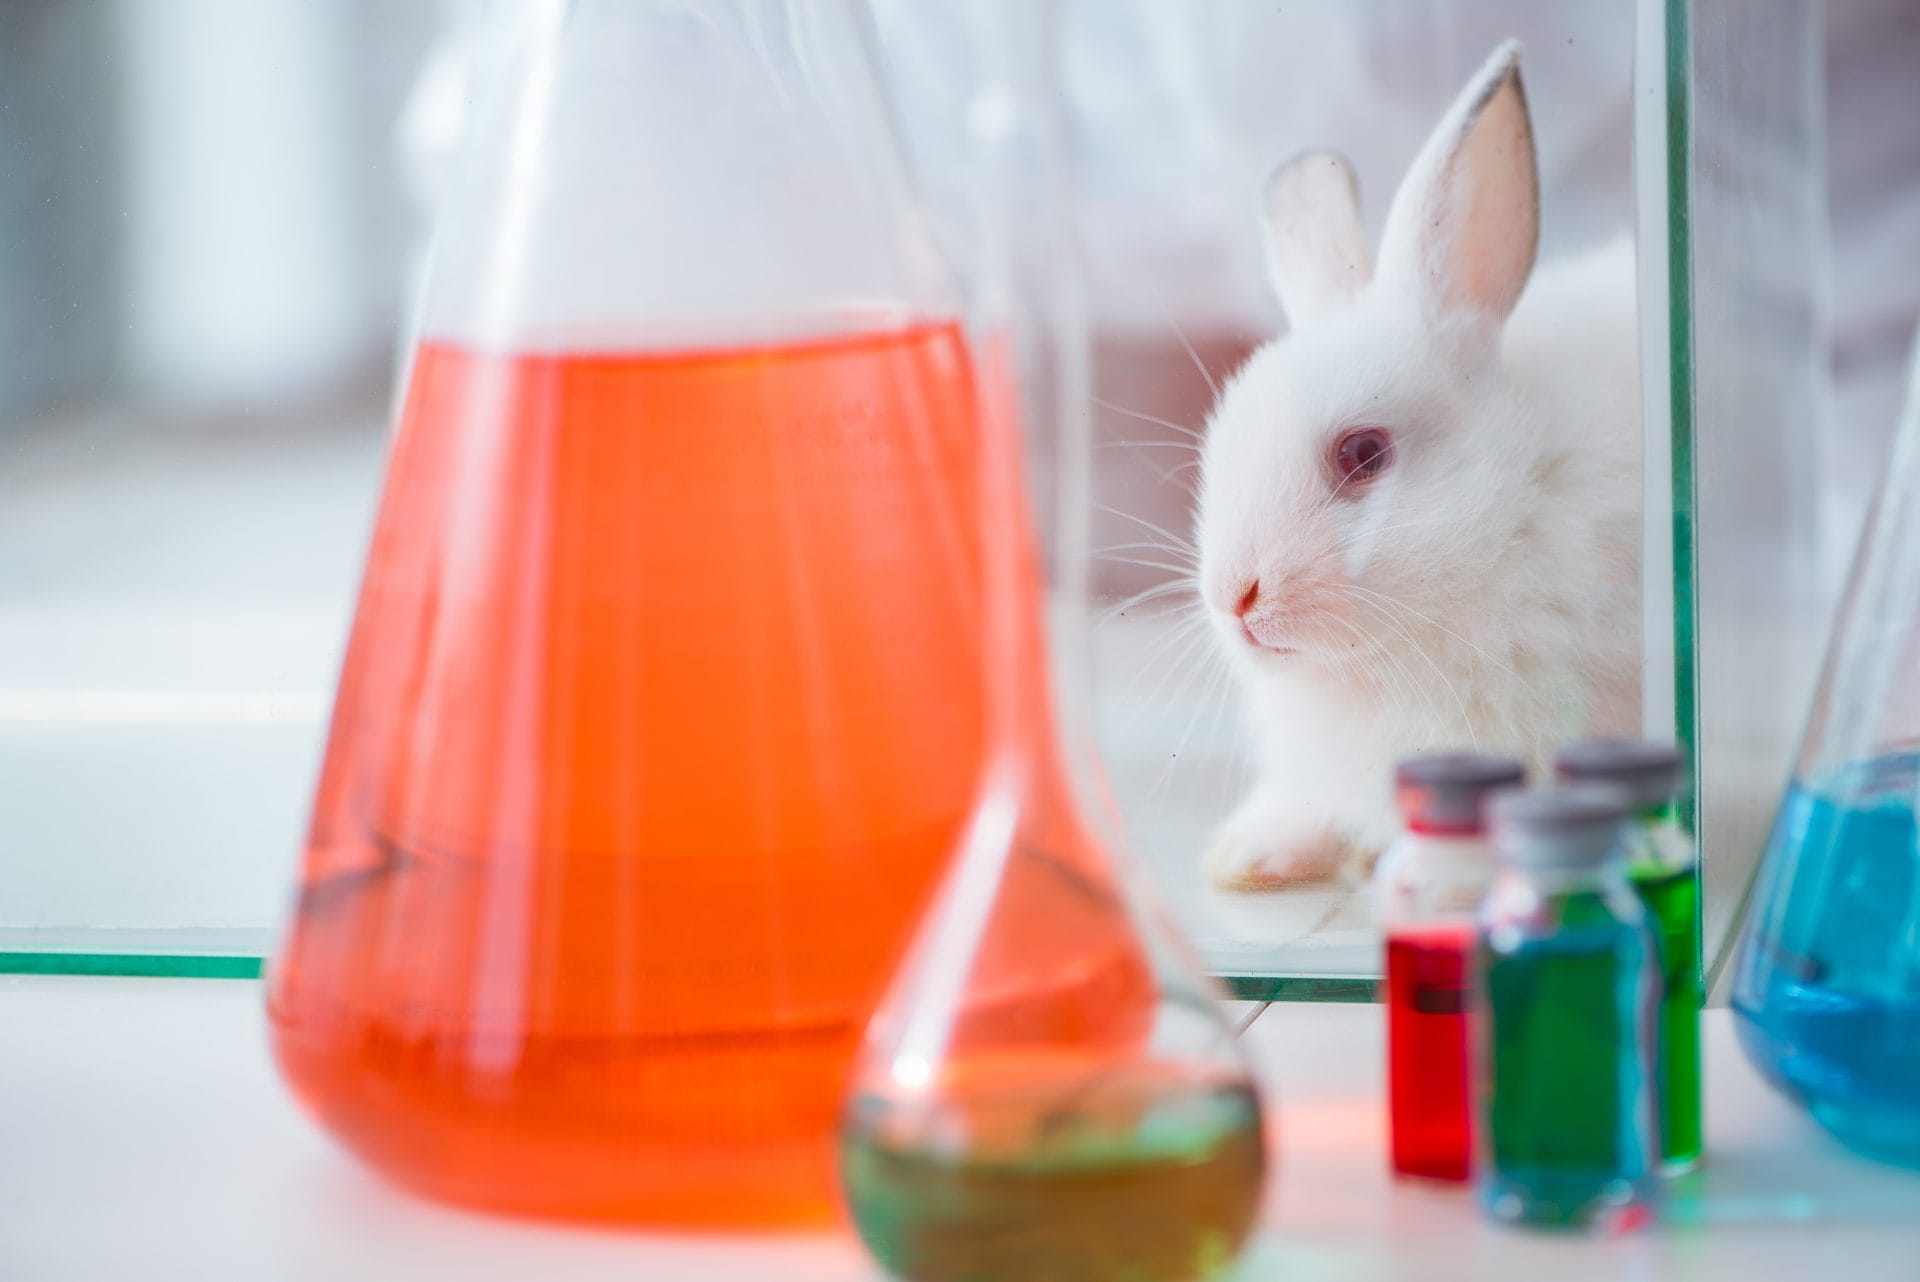 Rabbit in a science lab